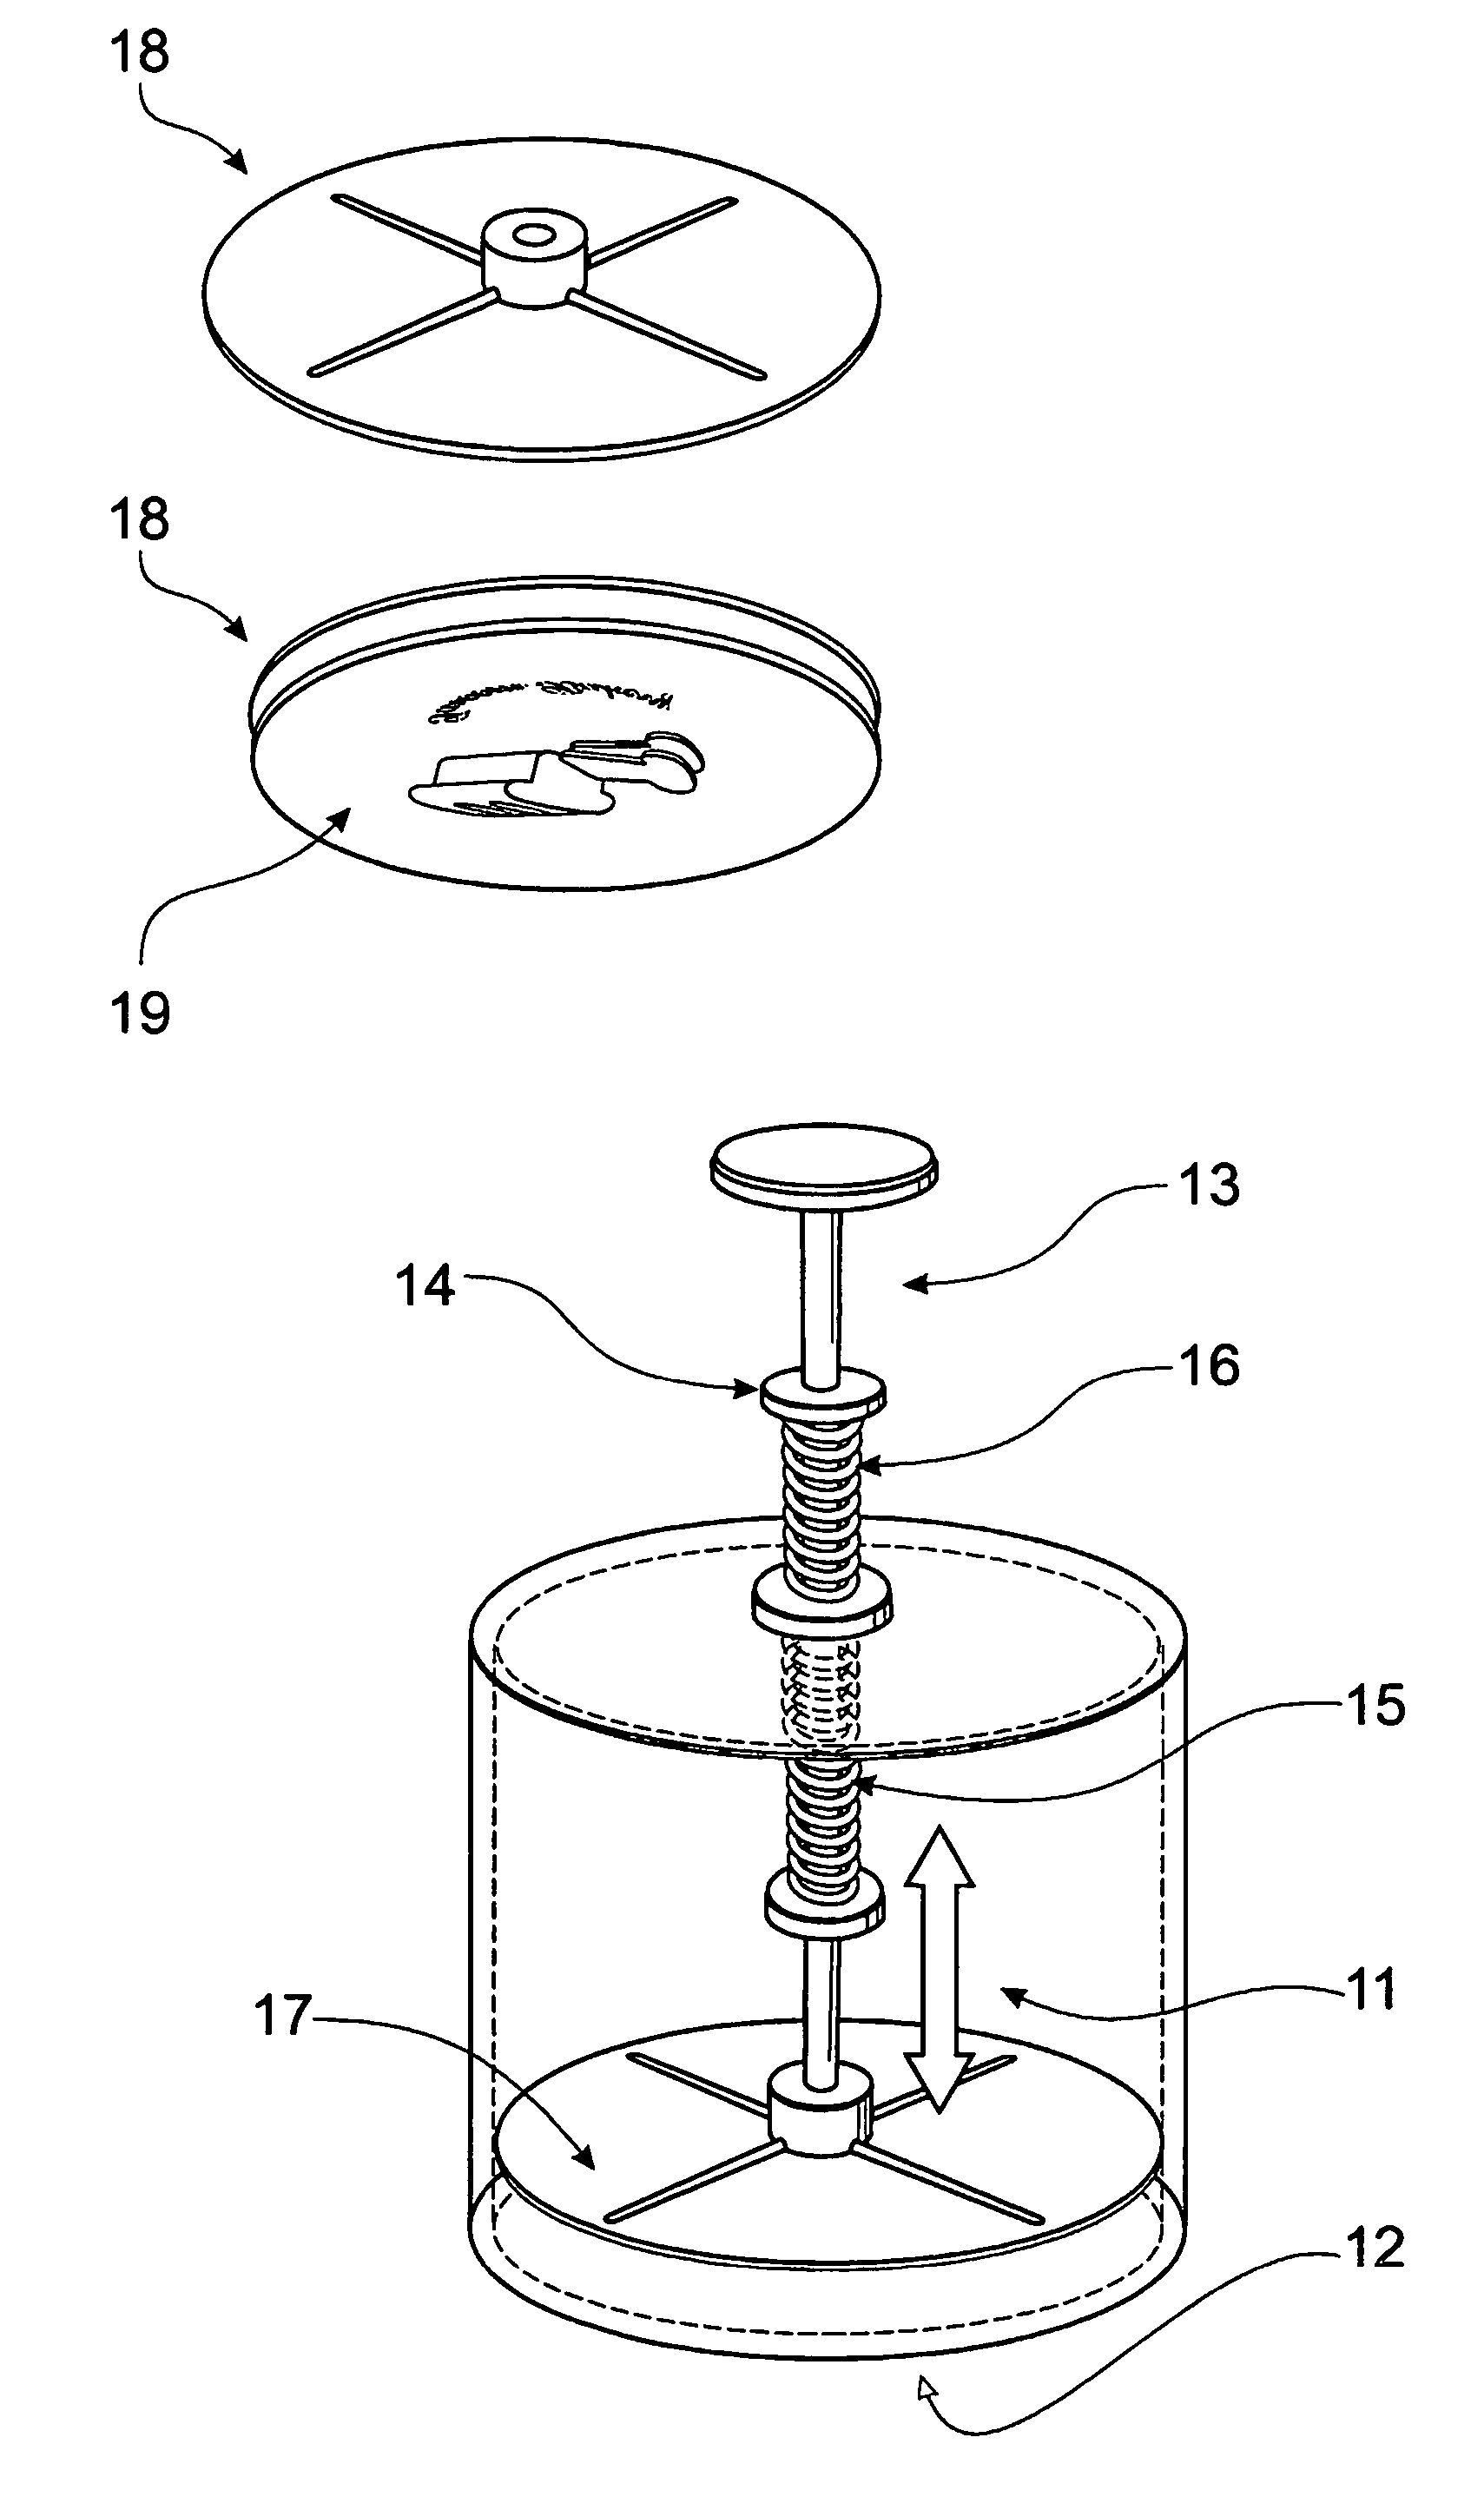 Method and apparatus for making bakery products